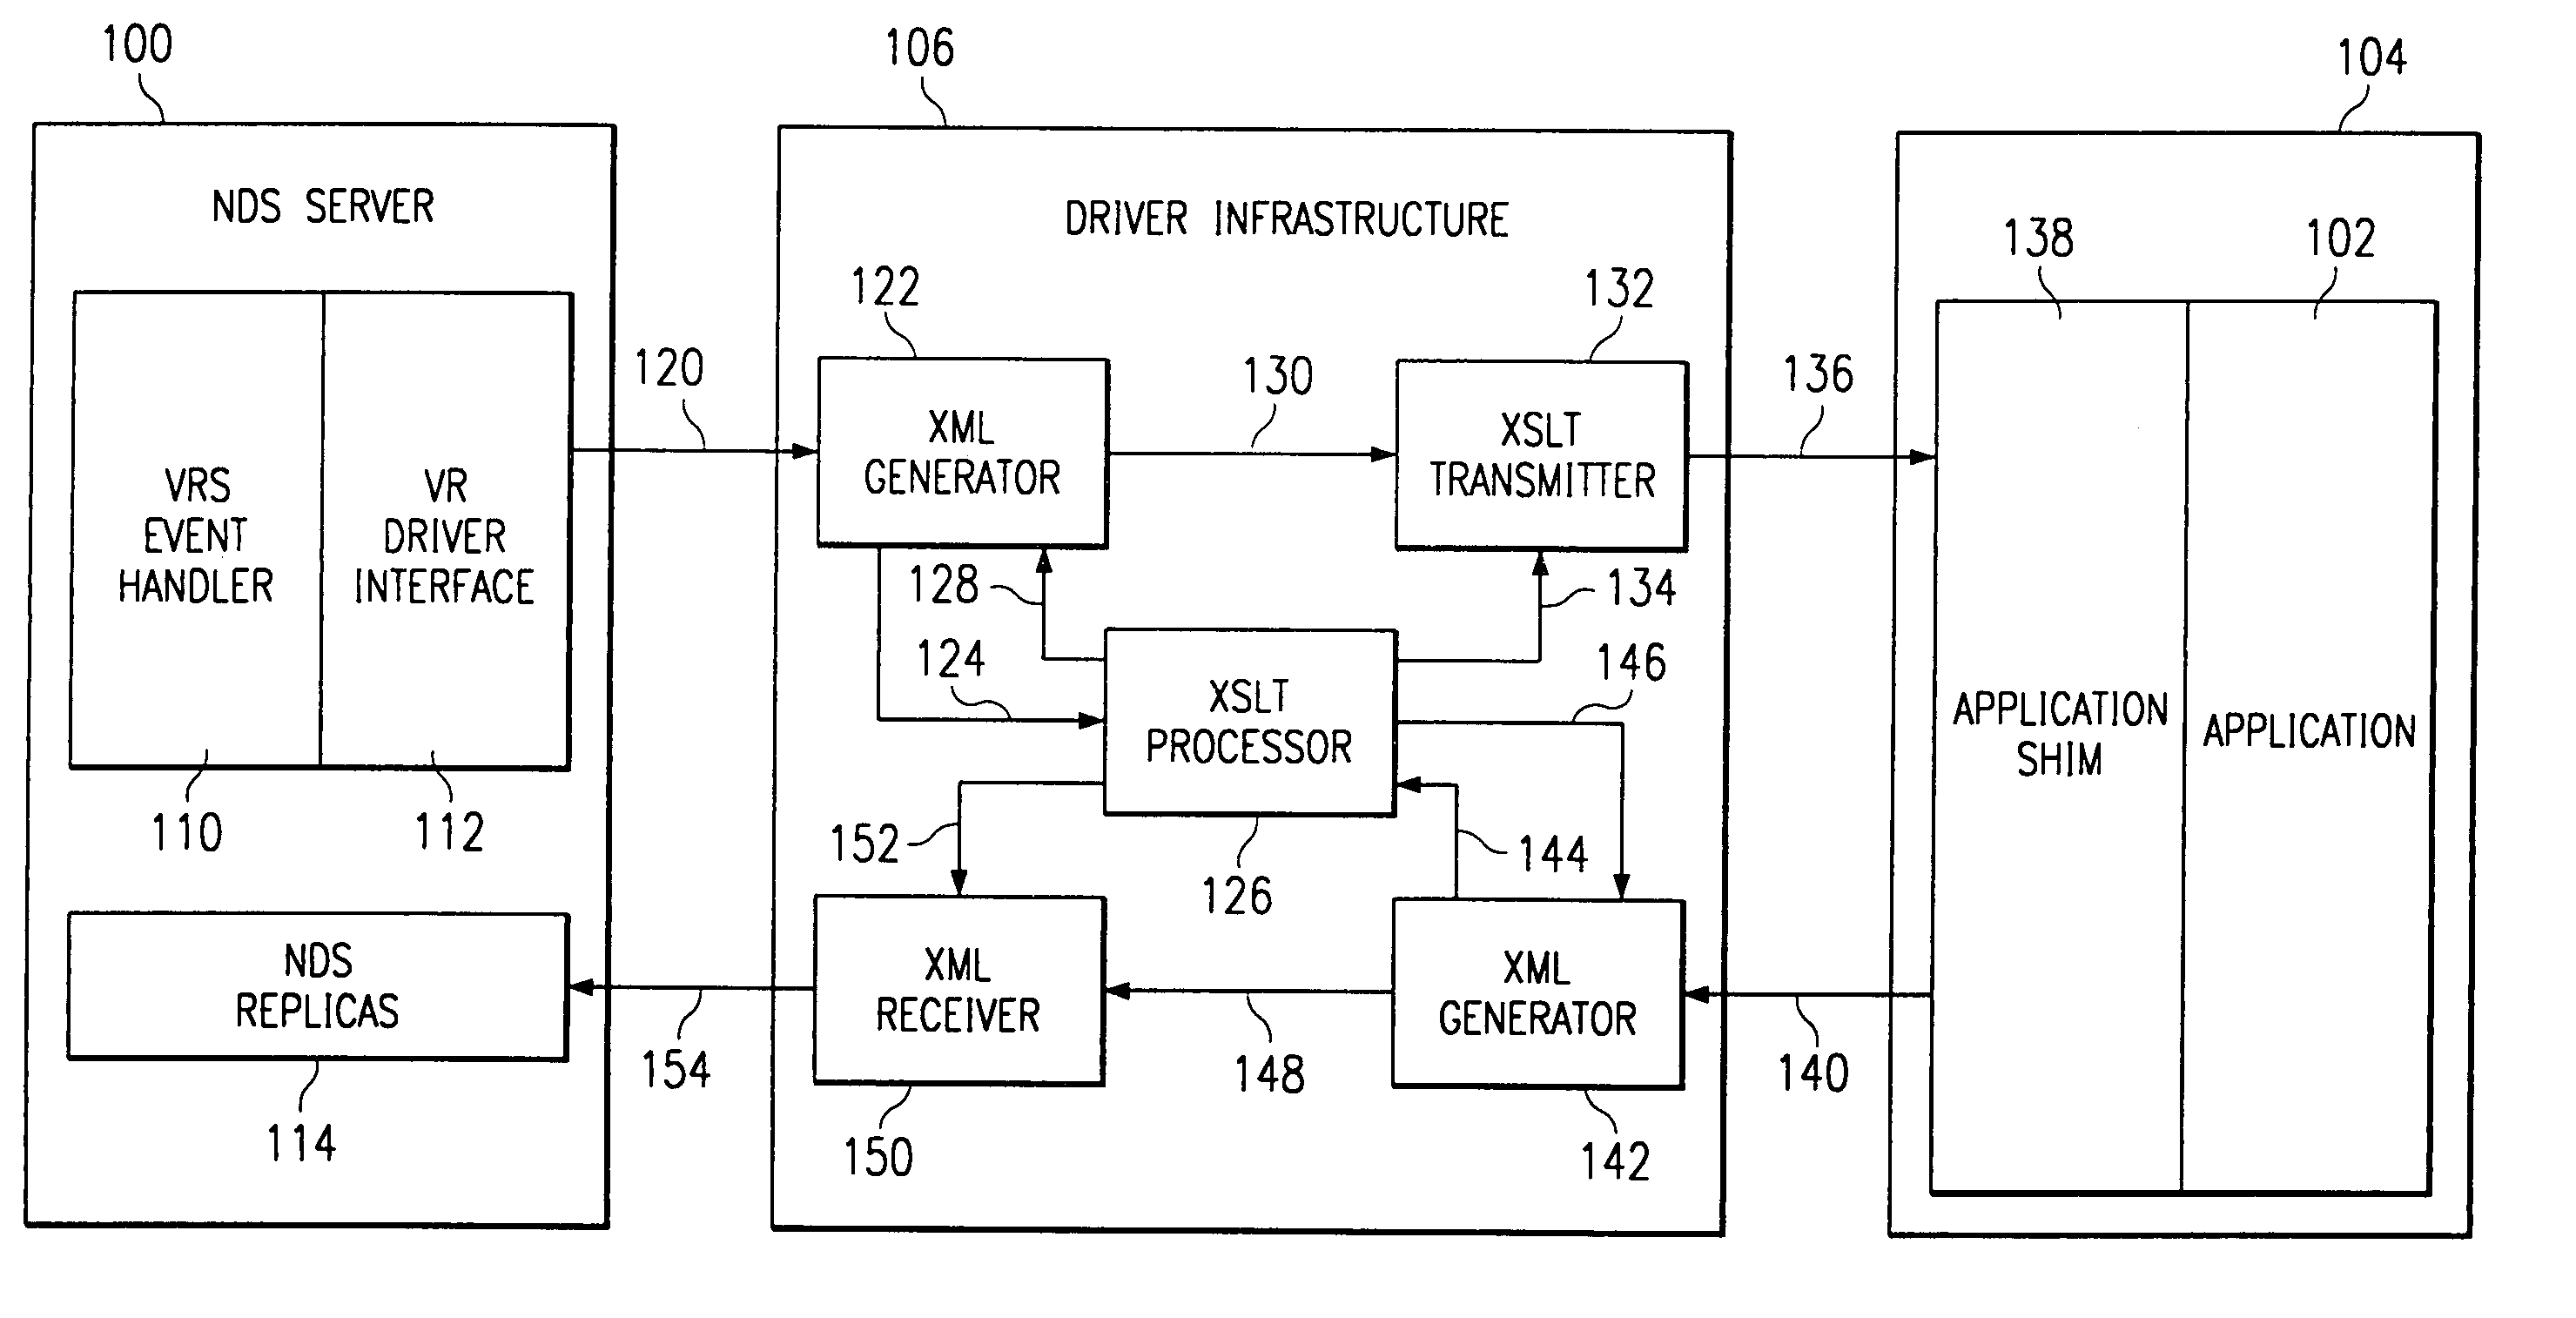 Computer directory system having an application integration driver infrastructure